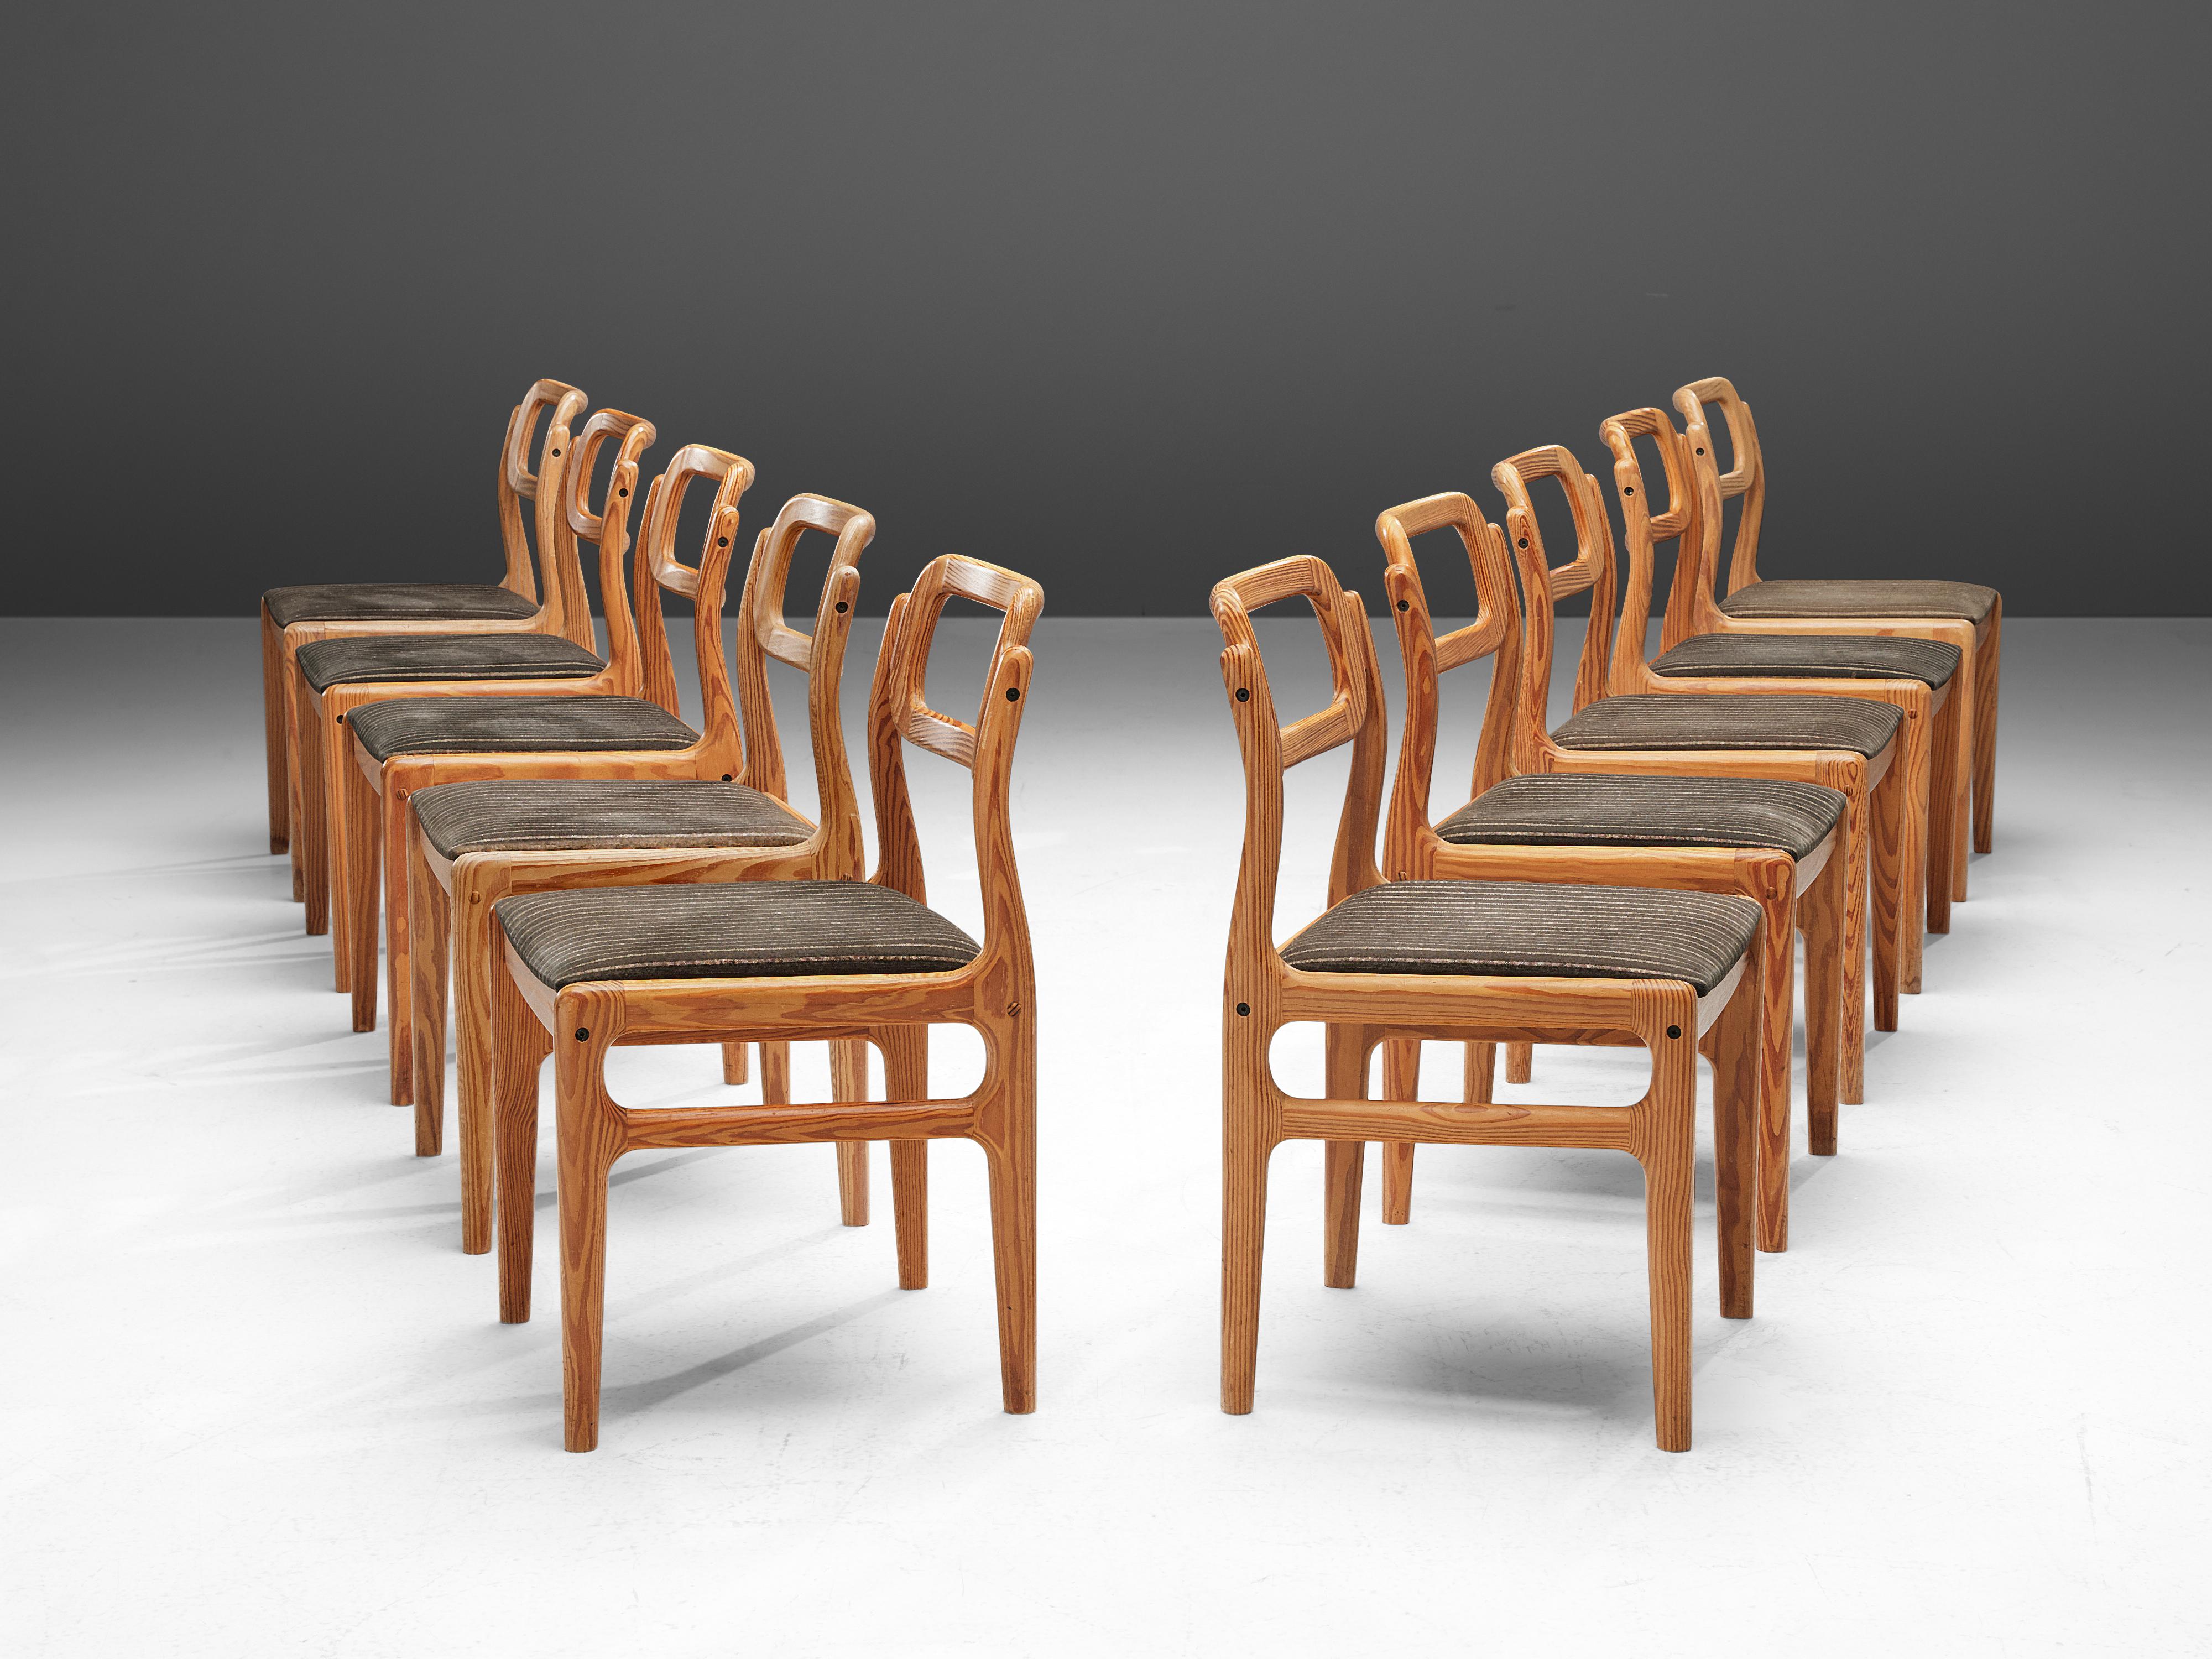 Johannes Andersen for Uldum Møbelfabrik, set of ten dining chairs, pine, fabric, Denmark, 1960s

These dining chairs belong to the Scandinavian Modern style and were designed by Johannes Andersen in the 1960s. Crafted from pine wood, the frames have